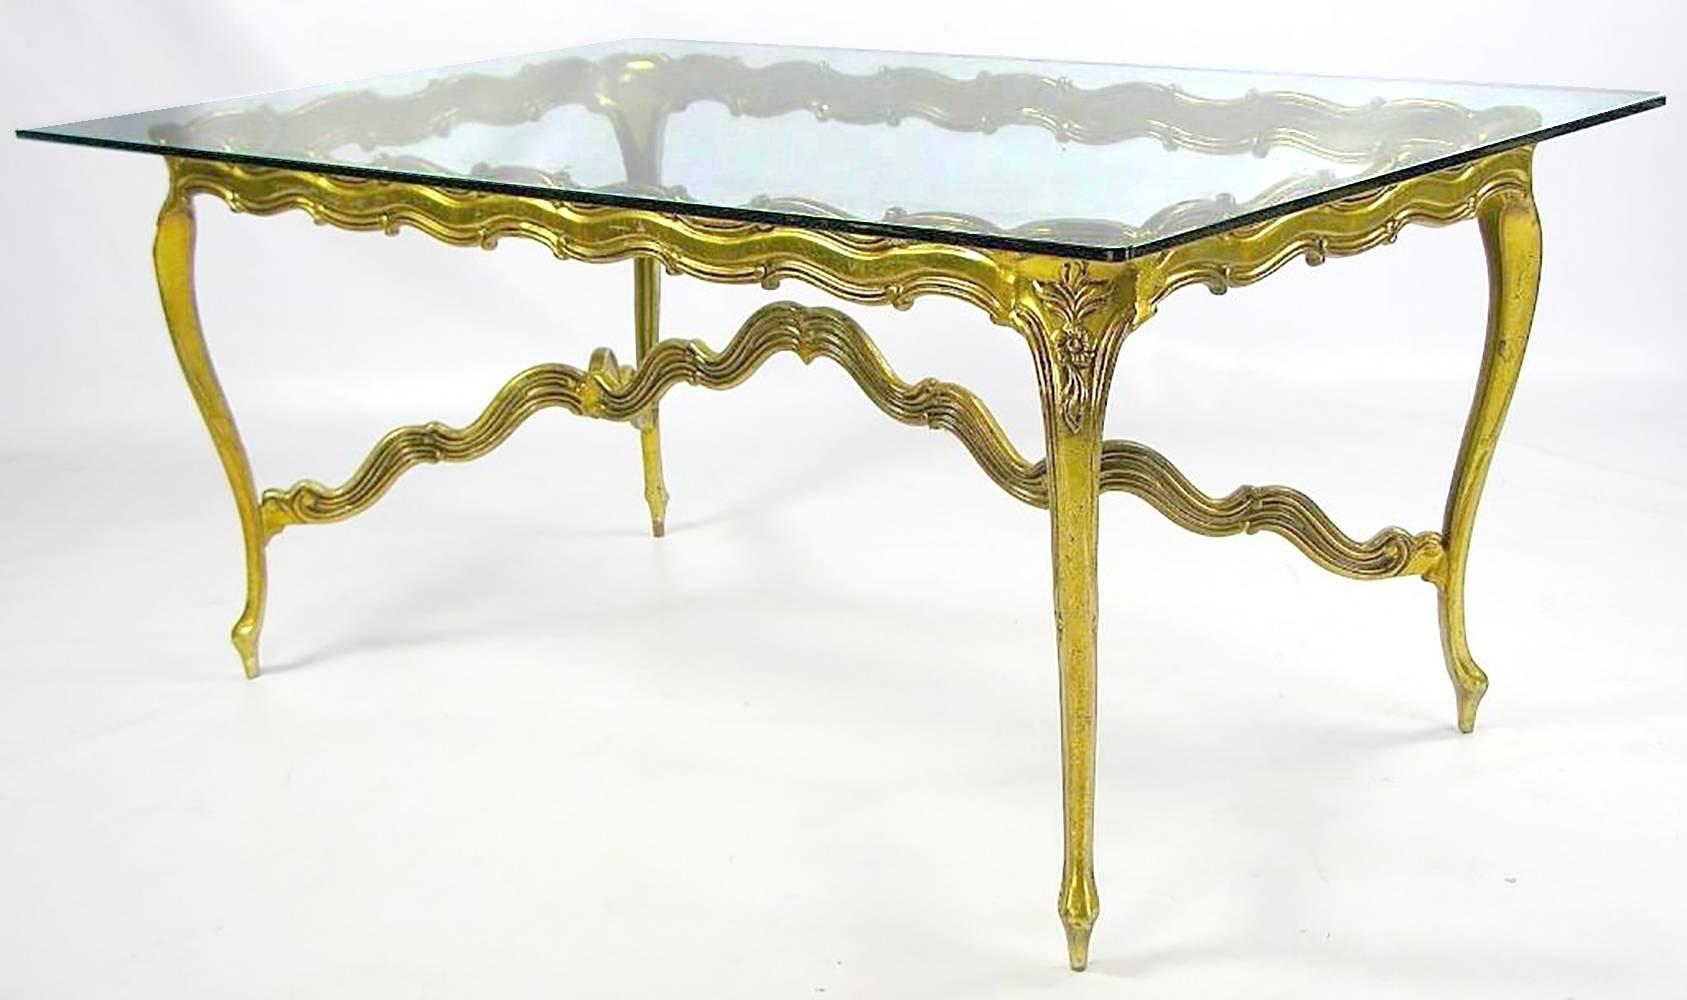 In a stylized Louis XV design, this table is a Mid-Century interpretation of a traditional form. The cast and patinated gilt aluminium frame is strong for its svelte profile, so it is visually lighter than its wood counterparts, with the clear glass